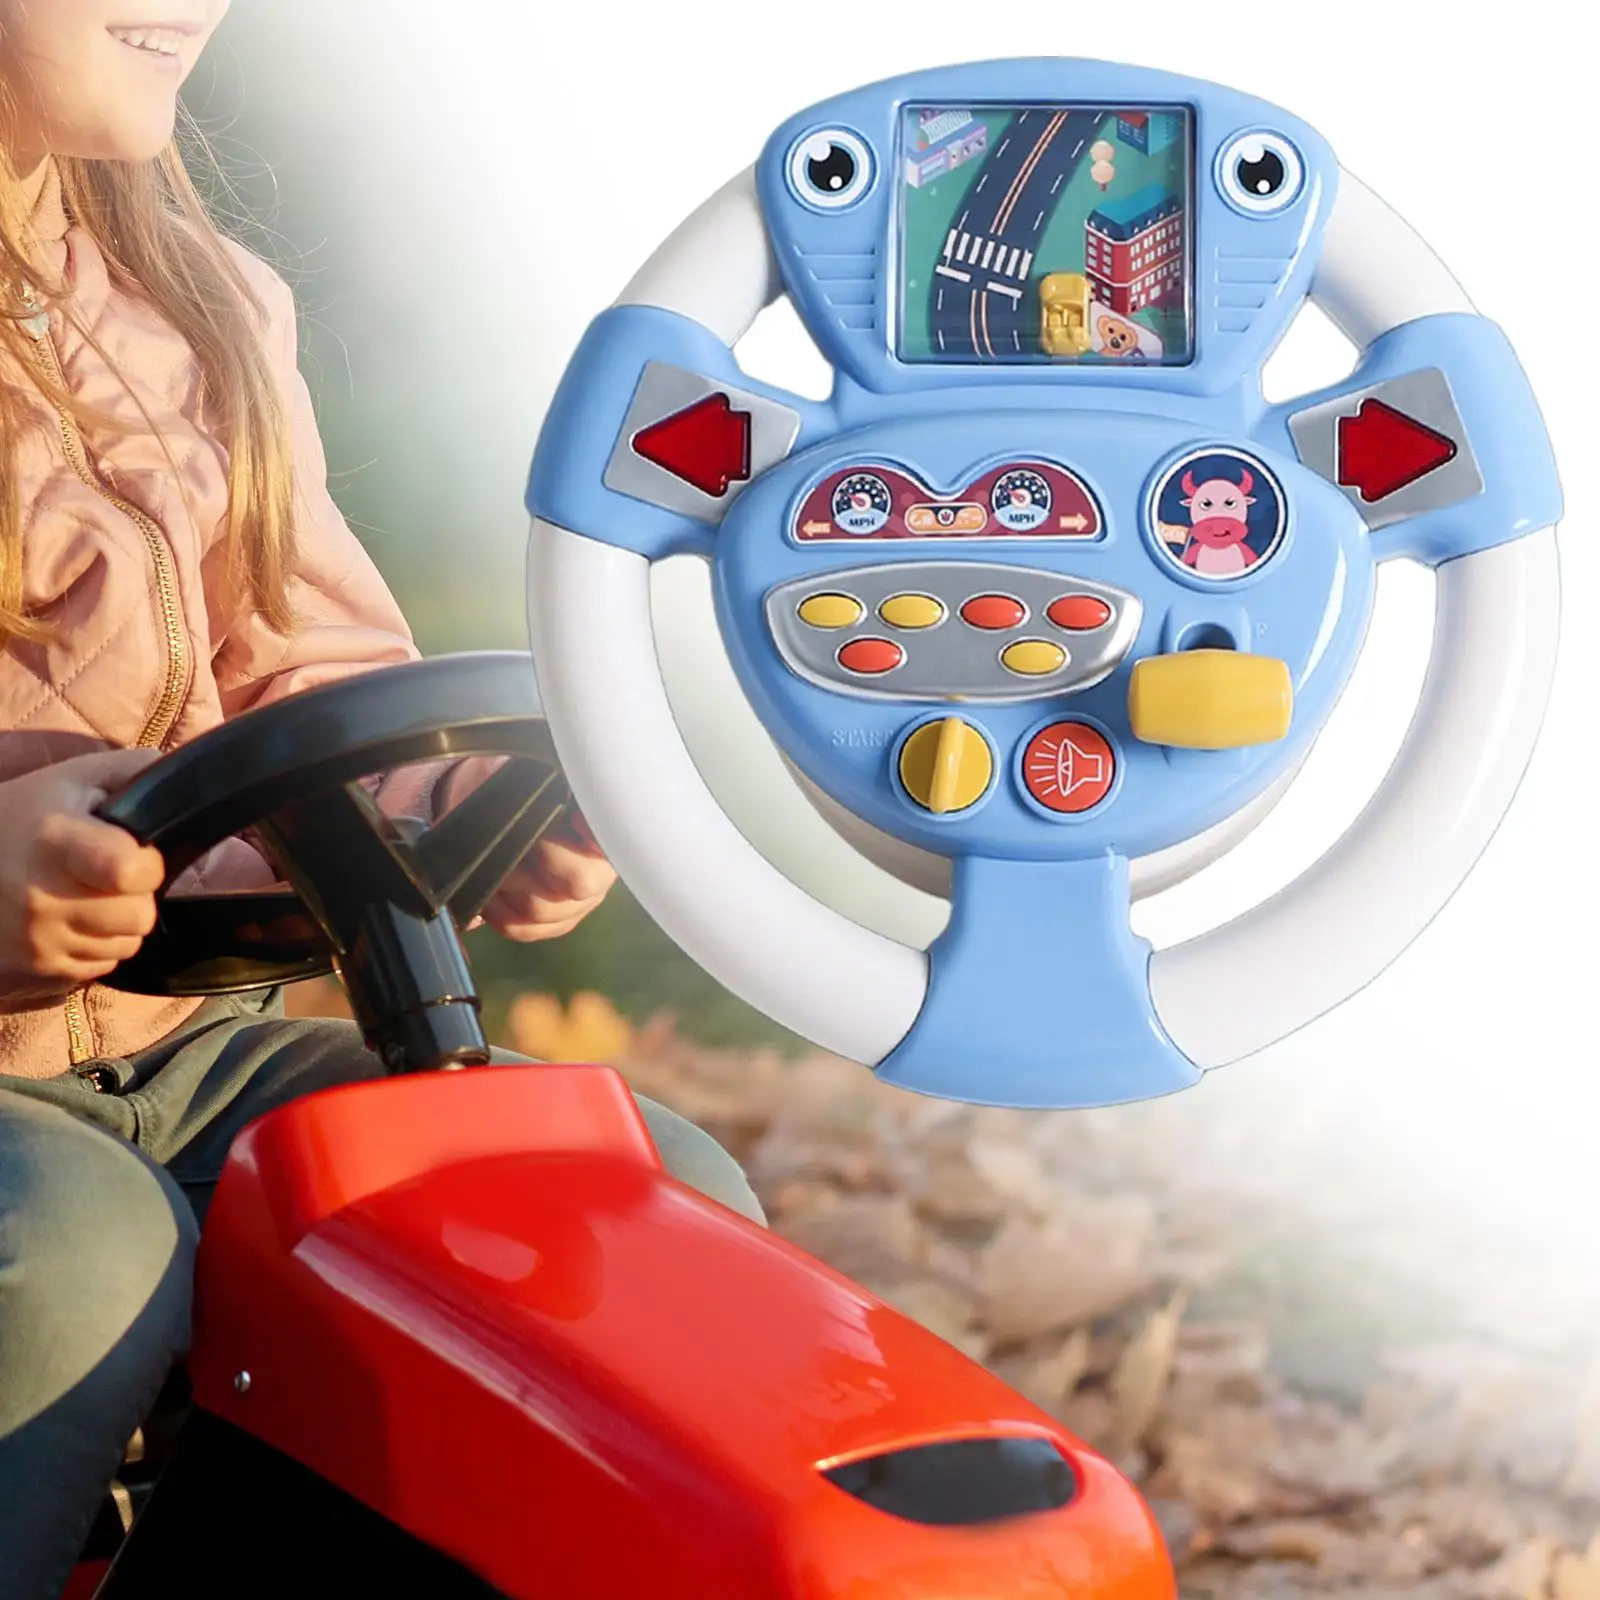 Multifunctional Steering Wheel Toys Educational Learning Toy Interactive Driving Wheel Interactive Toys for Kids Holiday Gift